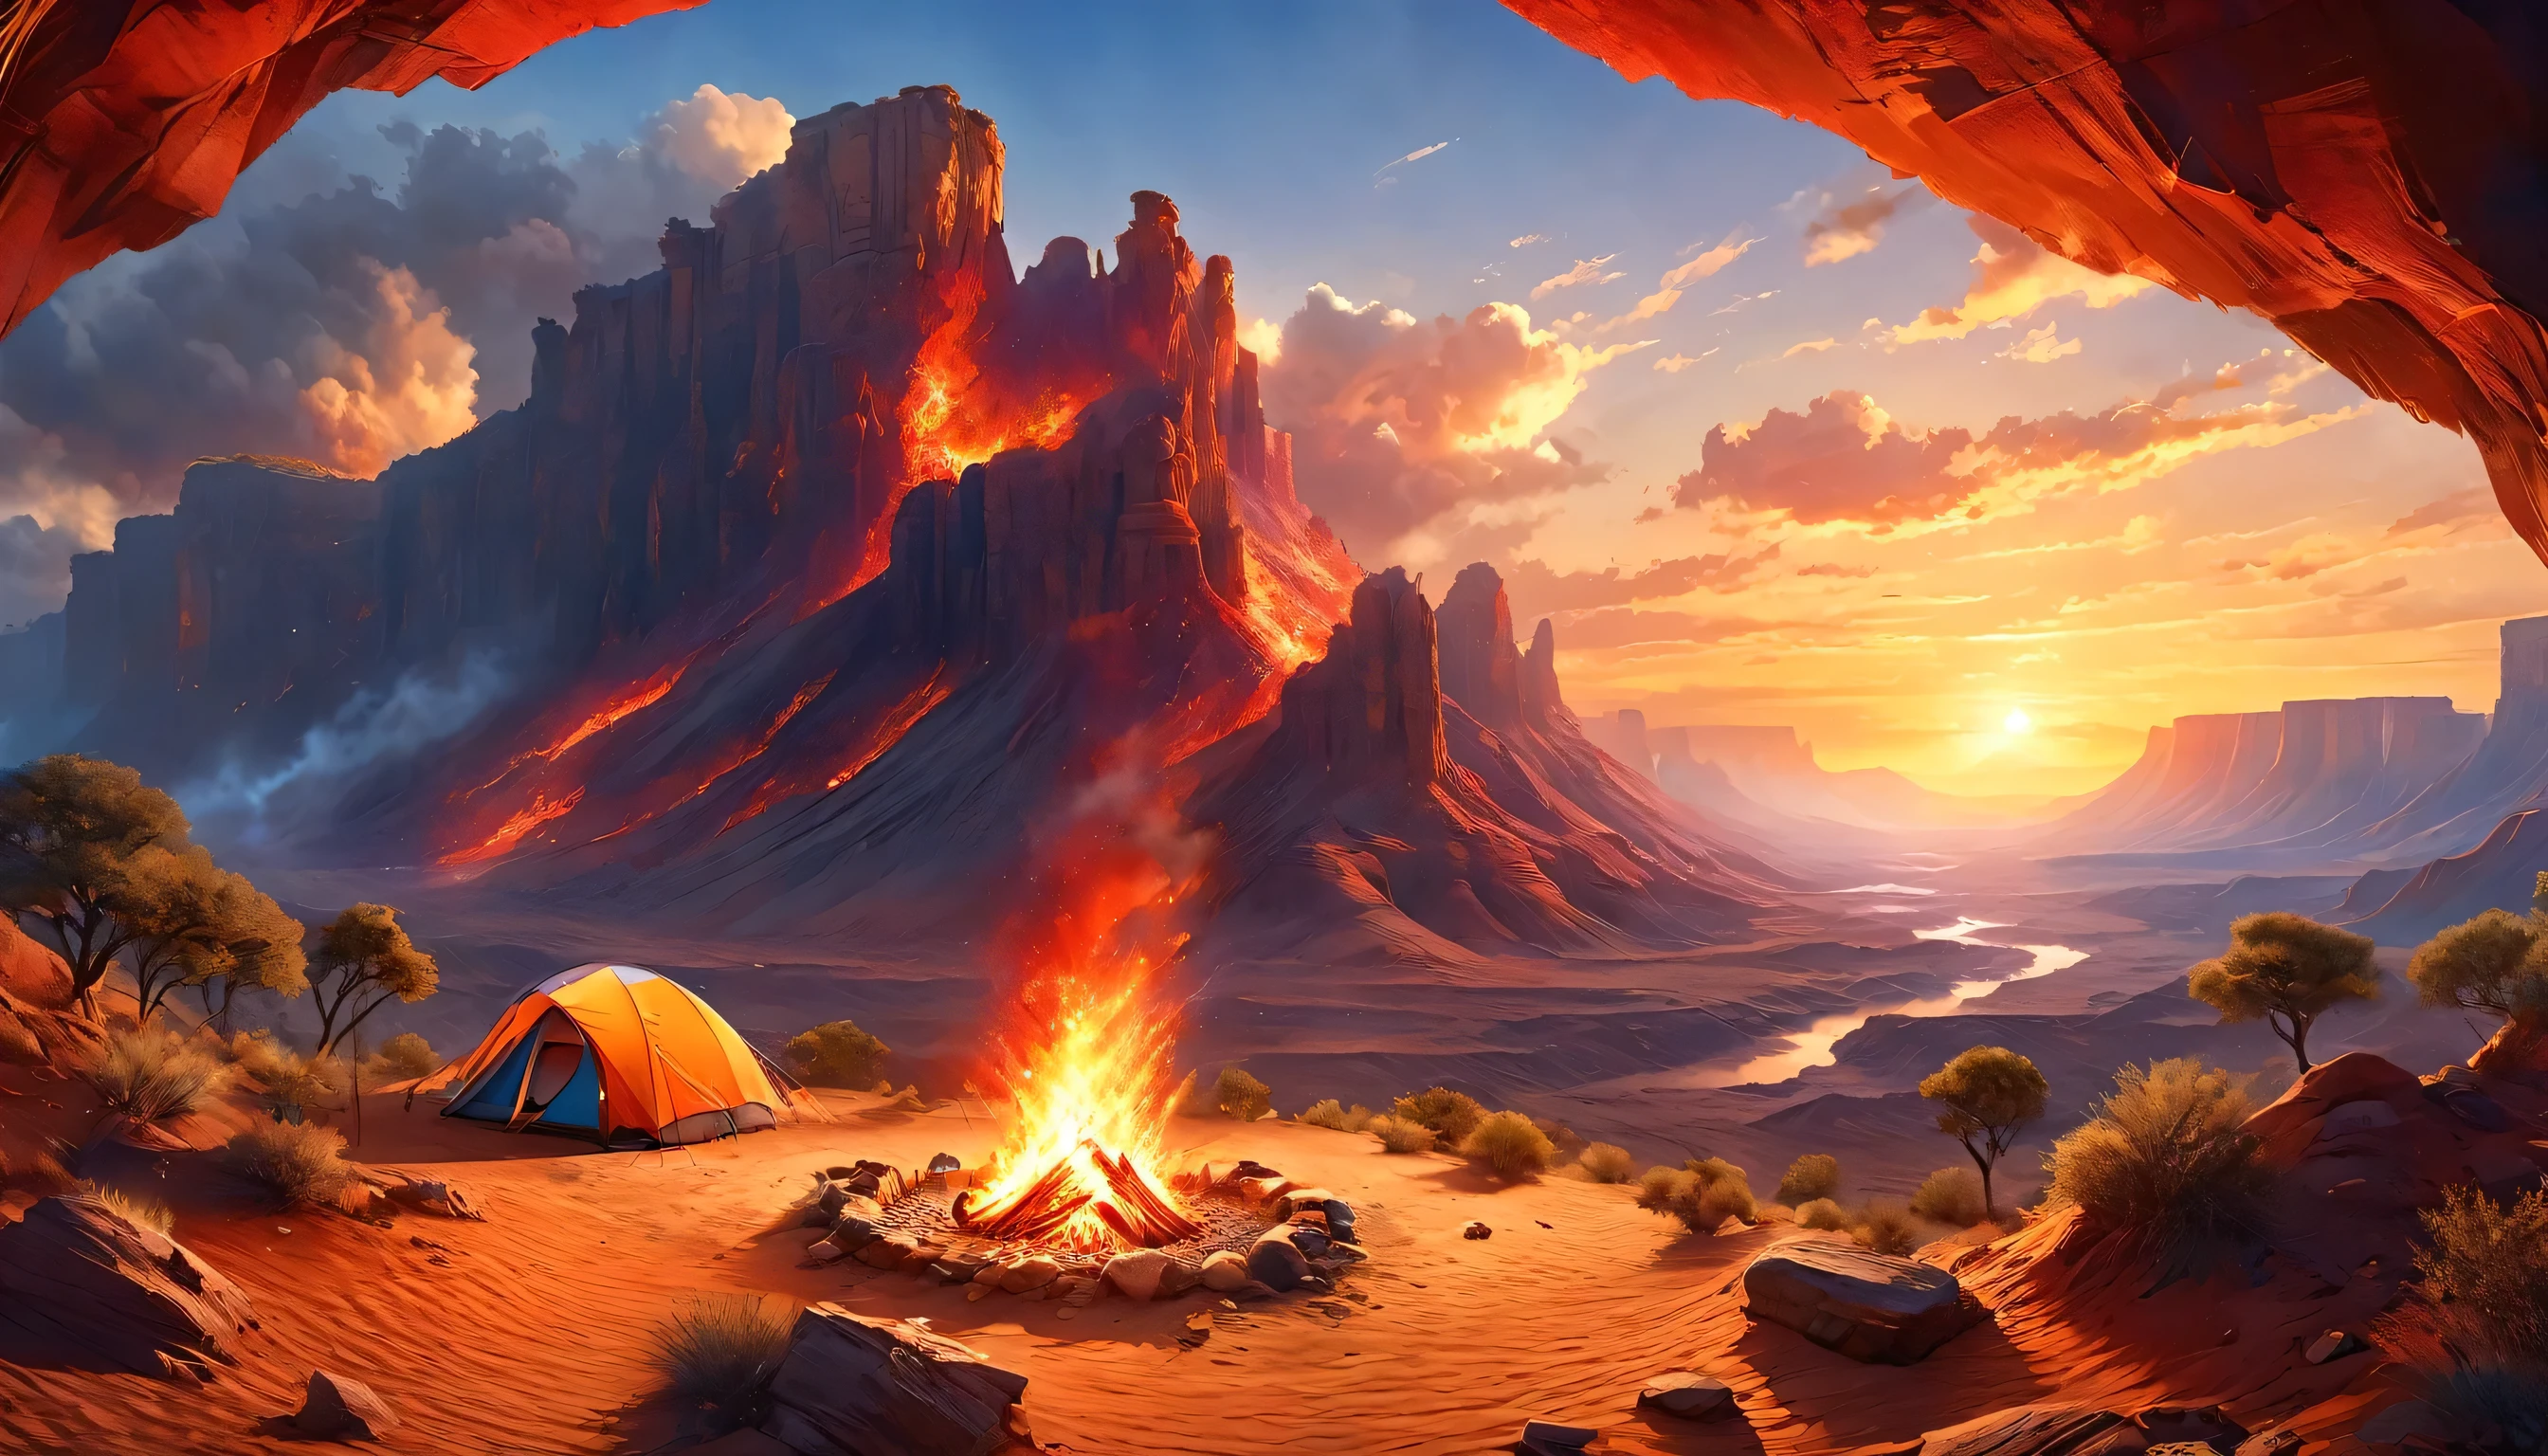 arafed, a picture of a camping (tent: 1.2) and small (campfire: 1.3) ((near)) the tent, on a desert mountaintop, its sunset the sky are in various shades of  (red: 1.1), (orange: 1.1), (azure: 1.1) (purple:1.1) there is smoke rising from the fire camp, there is a magnificent view of the desert canyon and ravines, there is sparce trees on the horizon, it is a time of serenity, peace, and relaxation, best quality, 16K,  photorealism, National Geographic award winning photoshoot, ultra wide shot, RagingNebula, ladyshadow